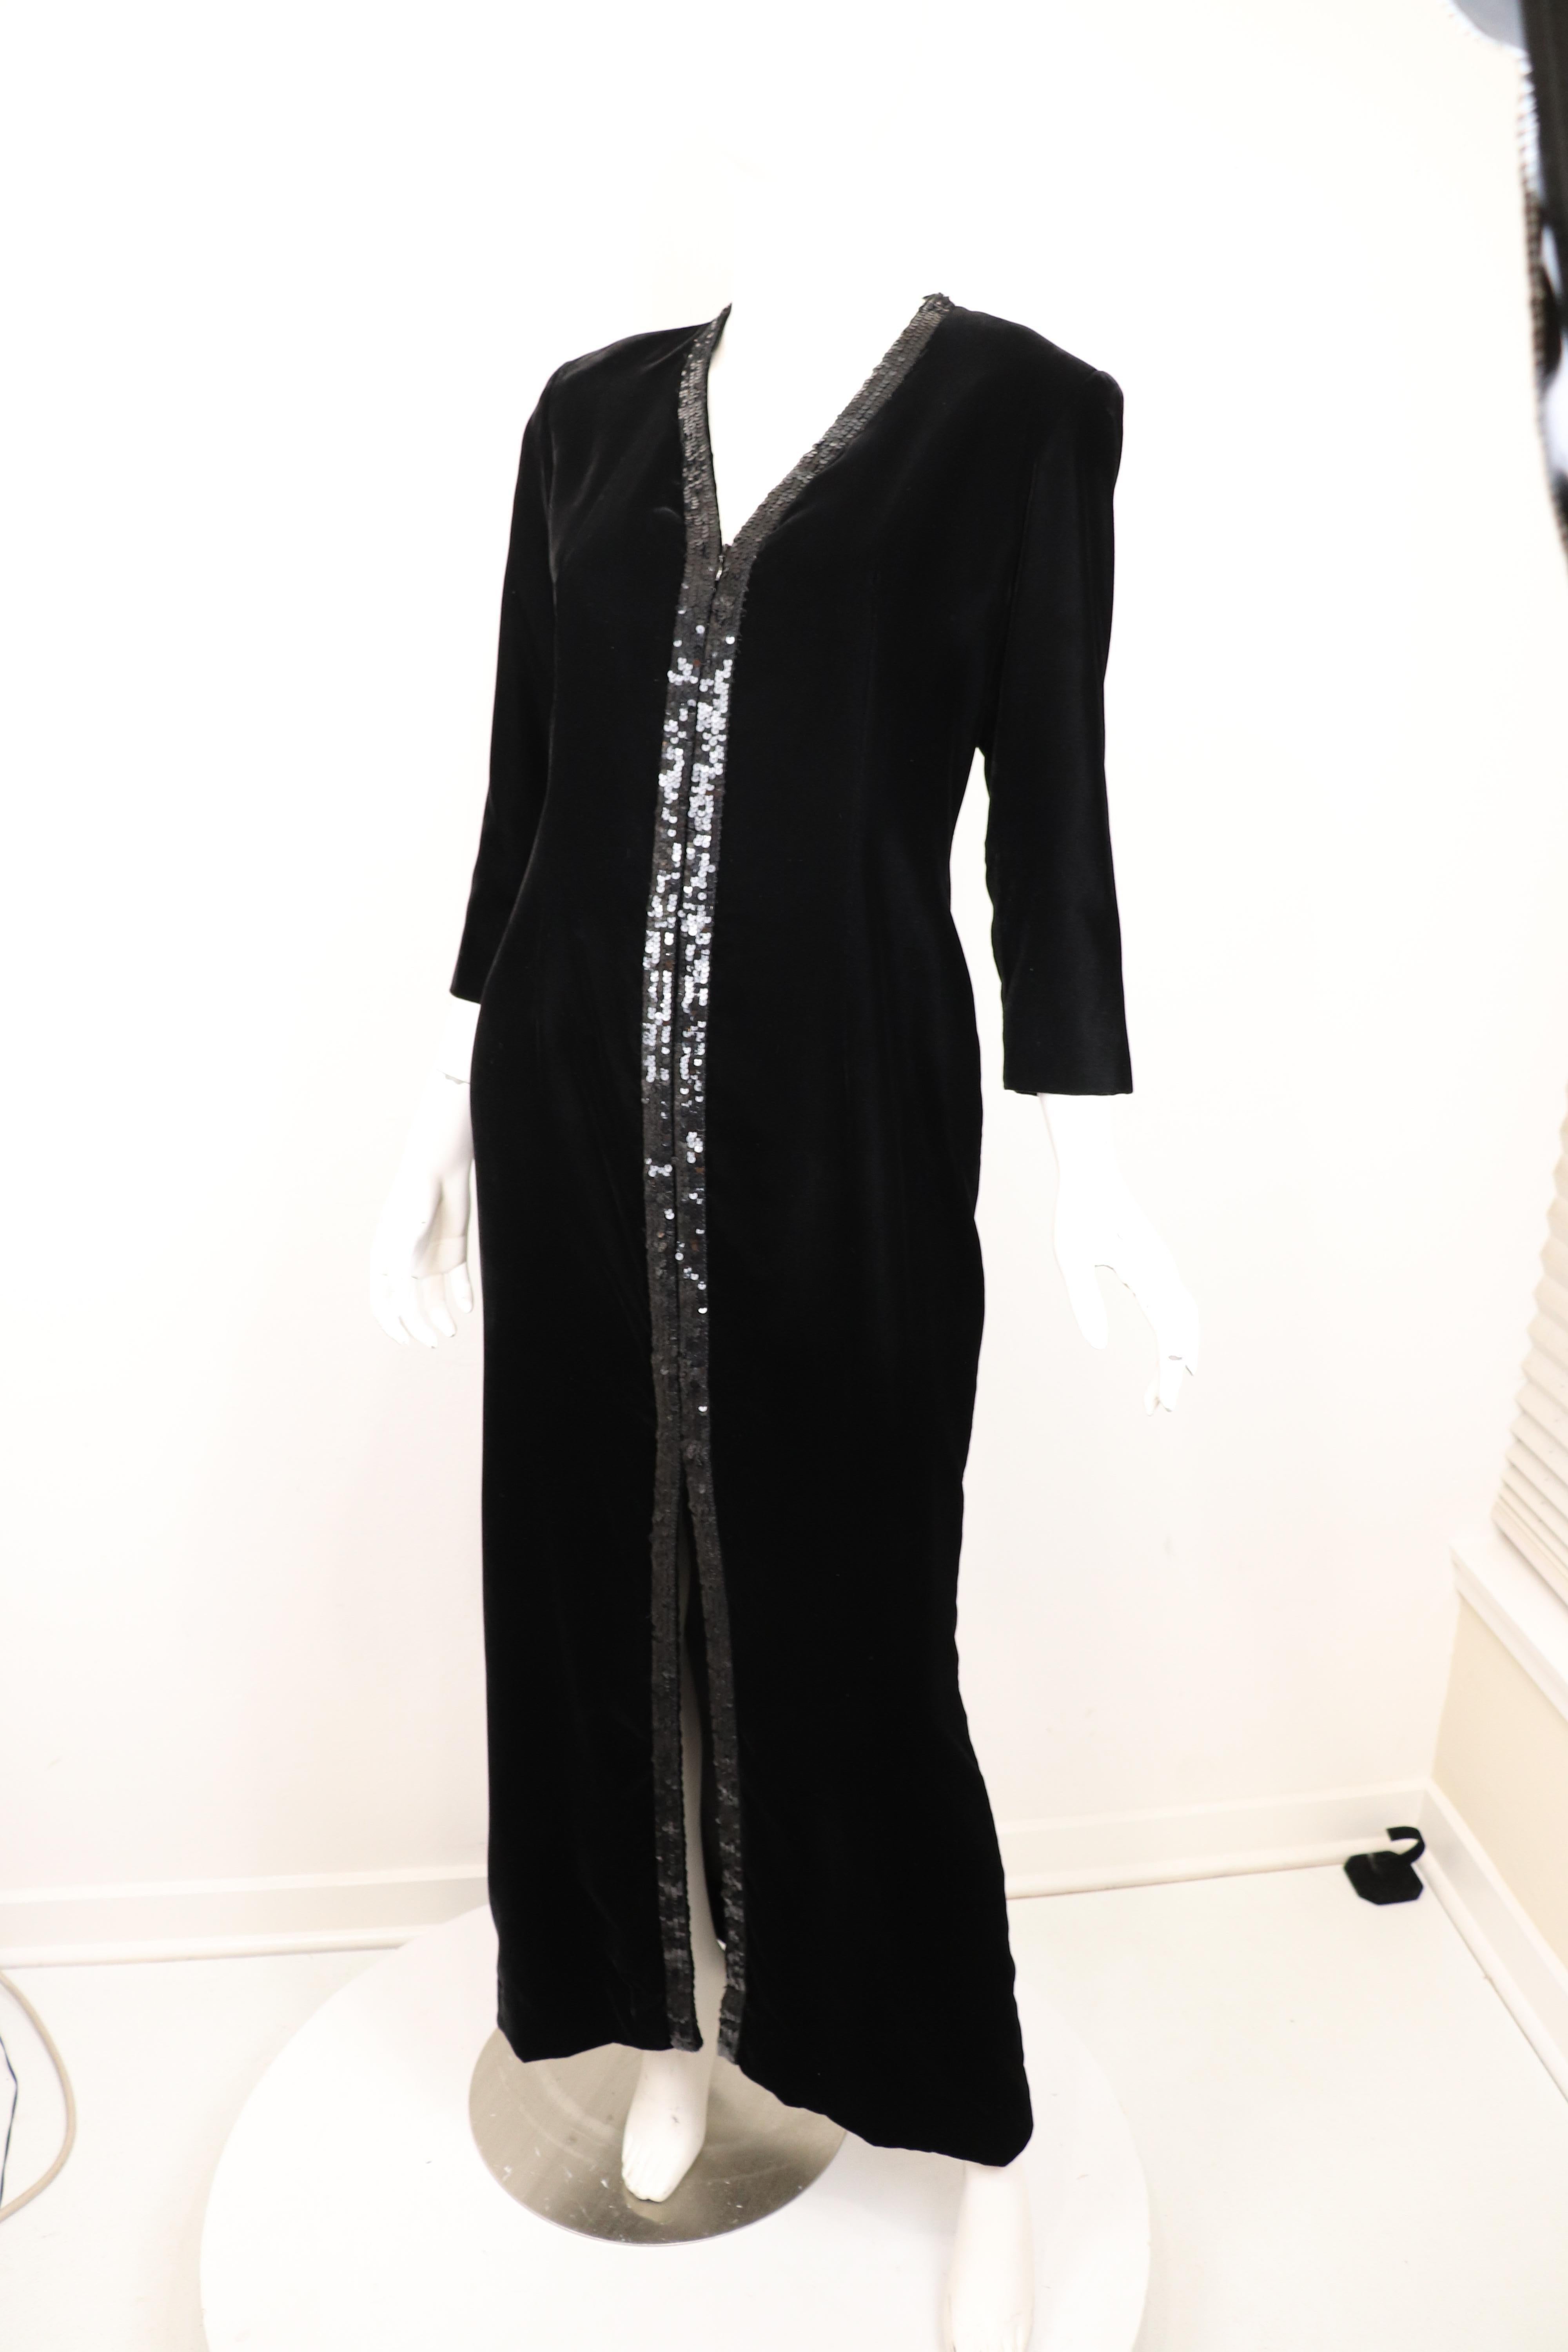 This luxurious Yves Saint Laurent Rive Gauche vintage column gown showcases a soft black velvet with 3/4 length sleeves and a black sequins trim that extends from the neckline, alongside the front zipper, to the front slit. Zipper unzips to about